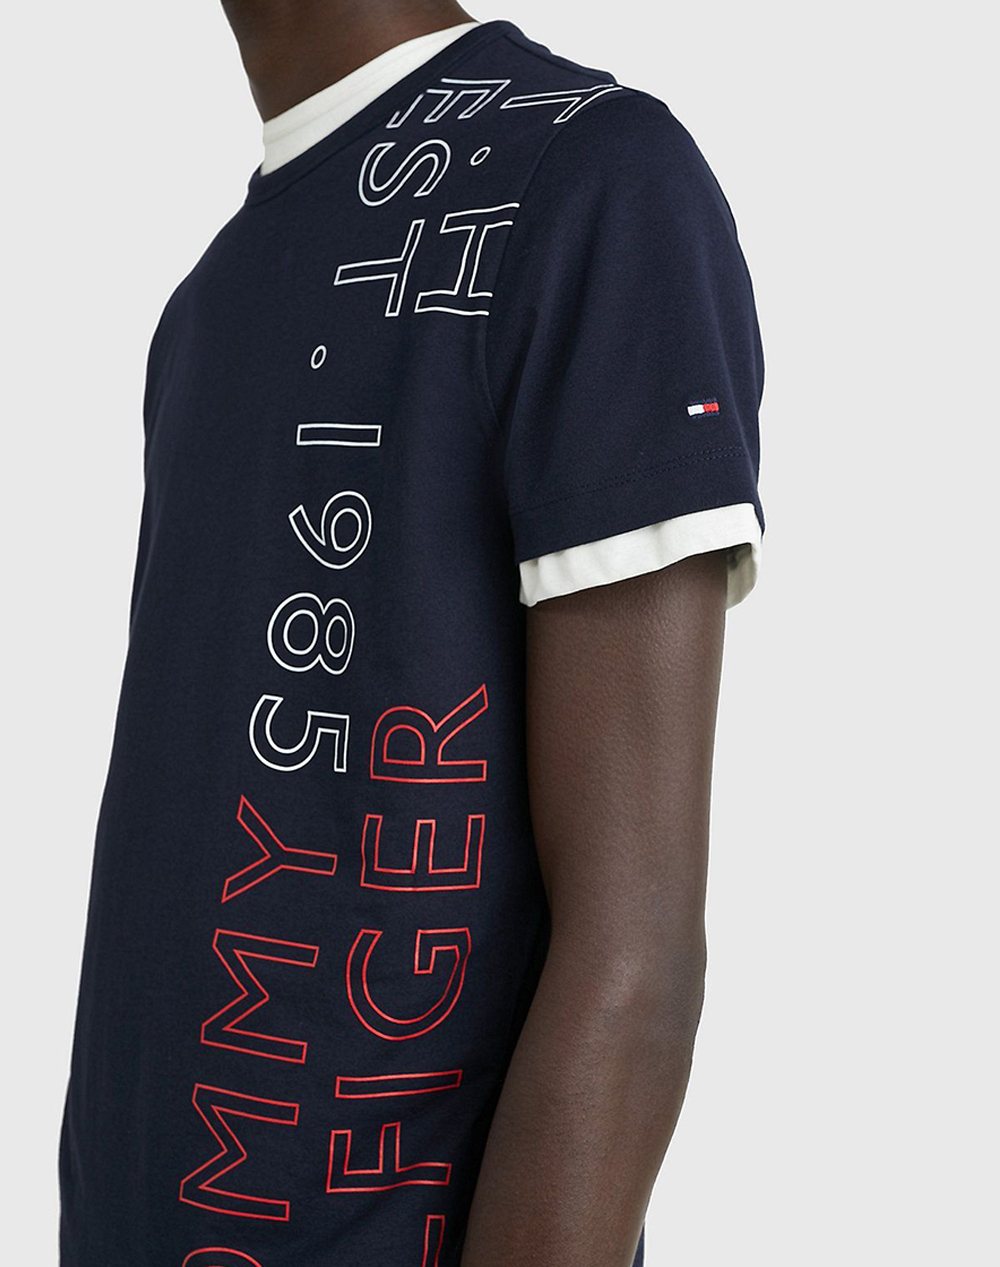 TOMMY HILFIGER OFF PLACEMENT TEE